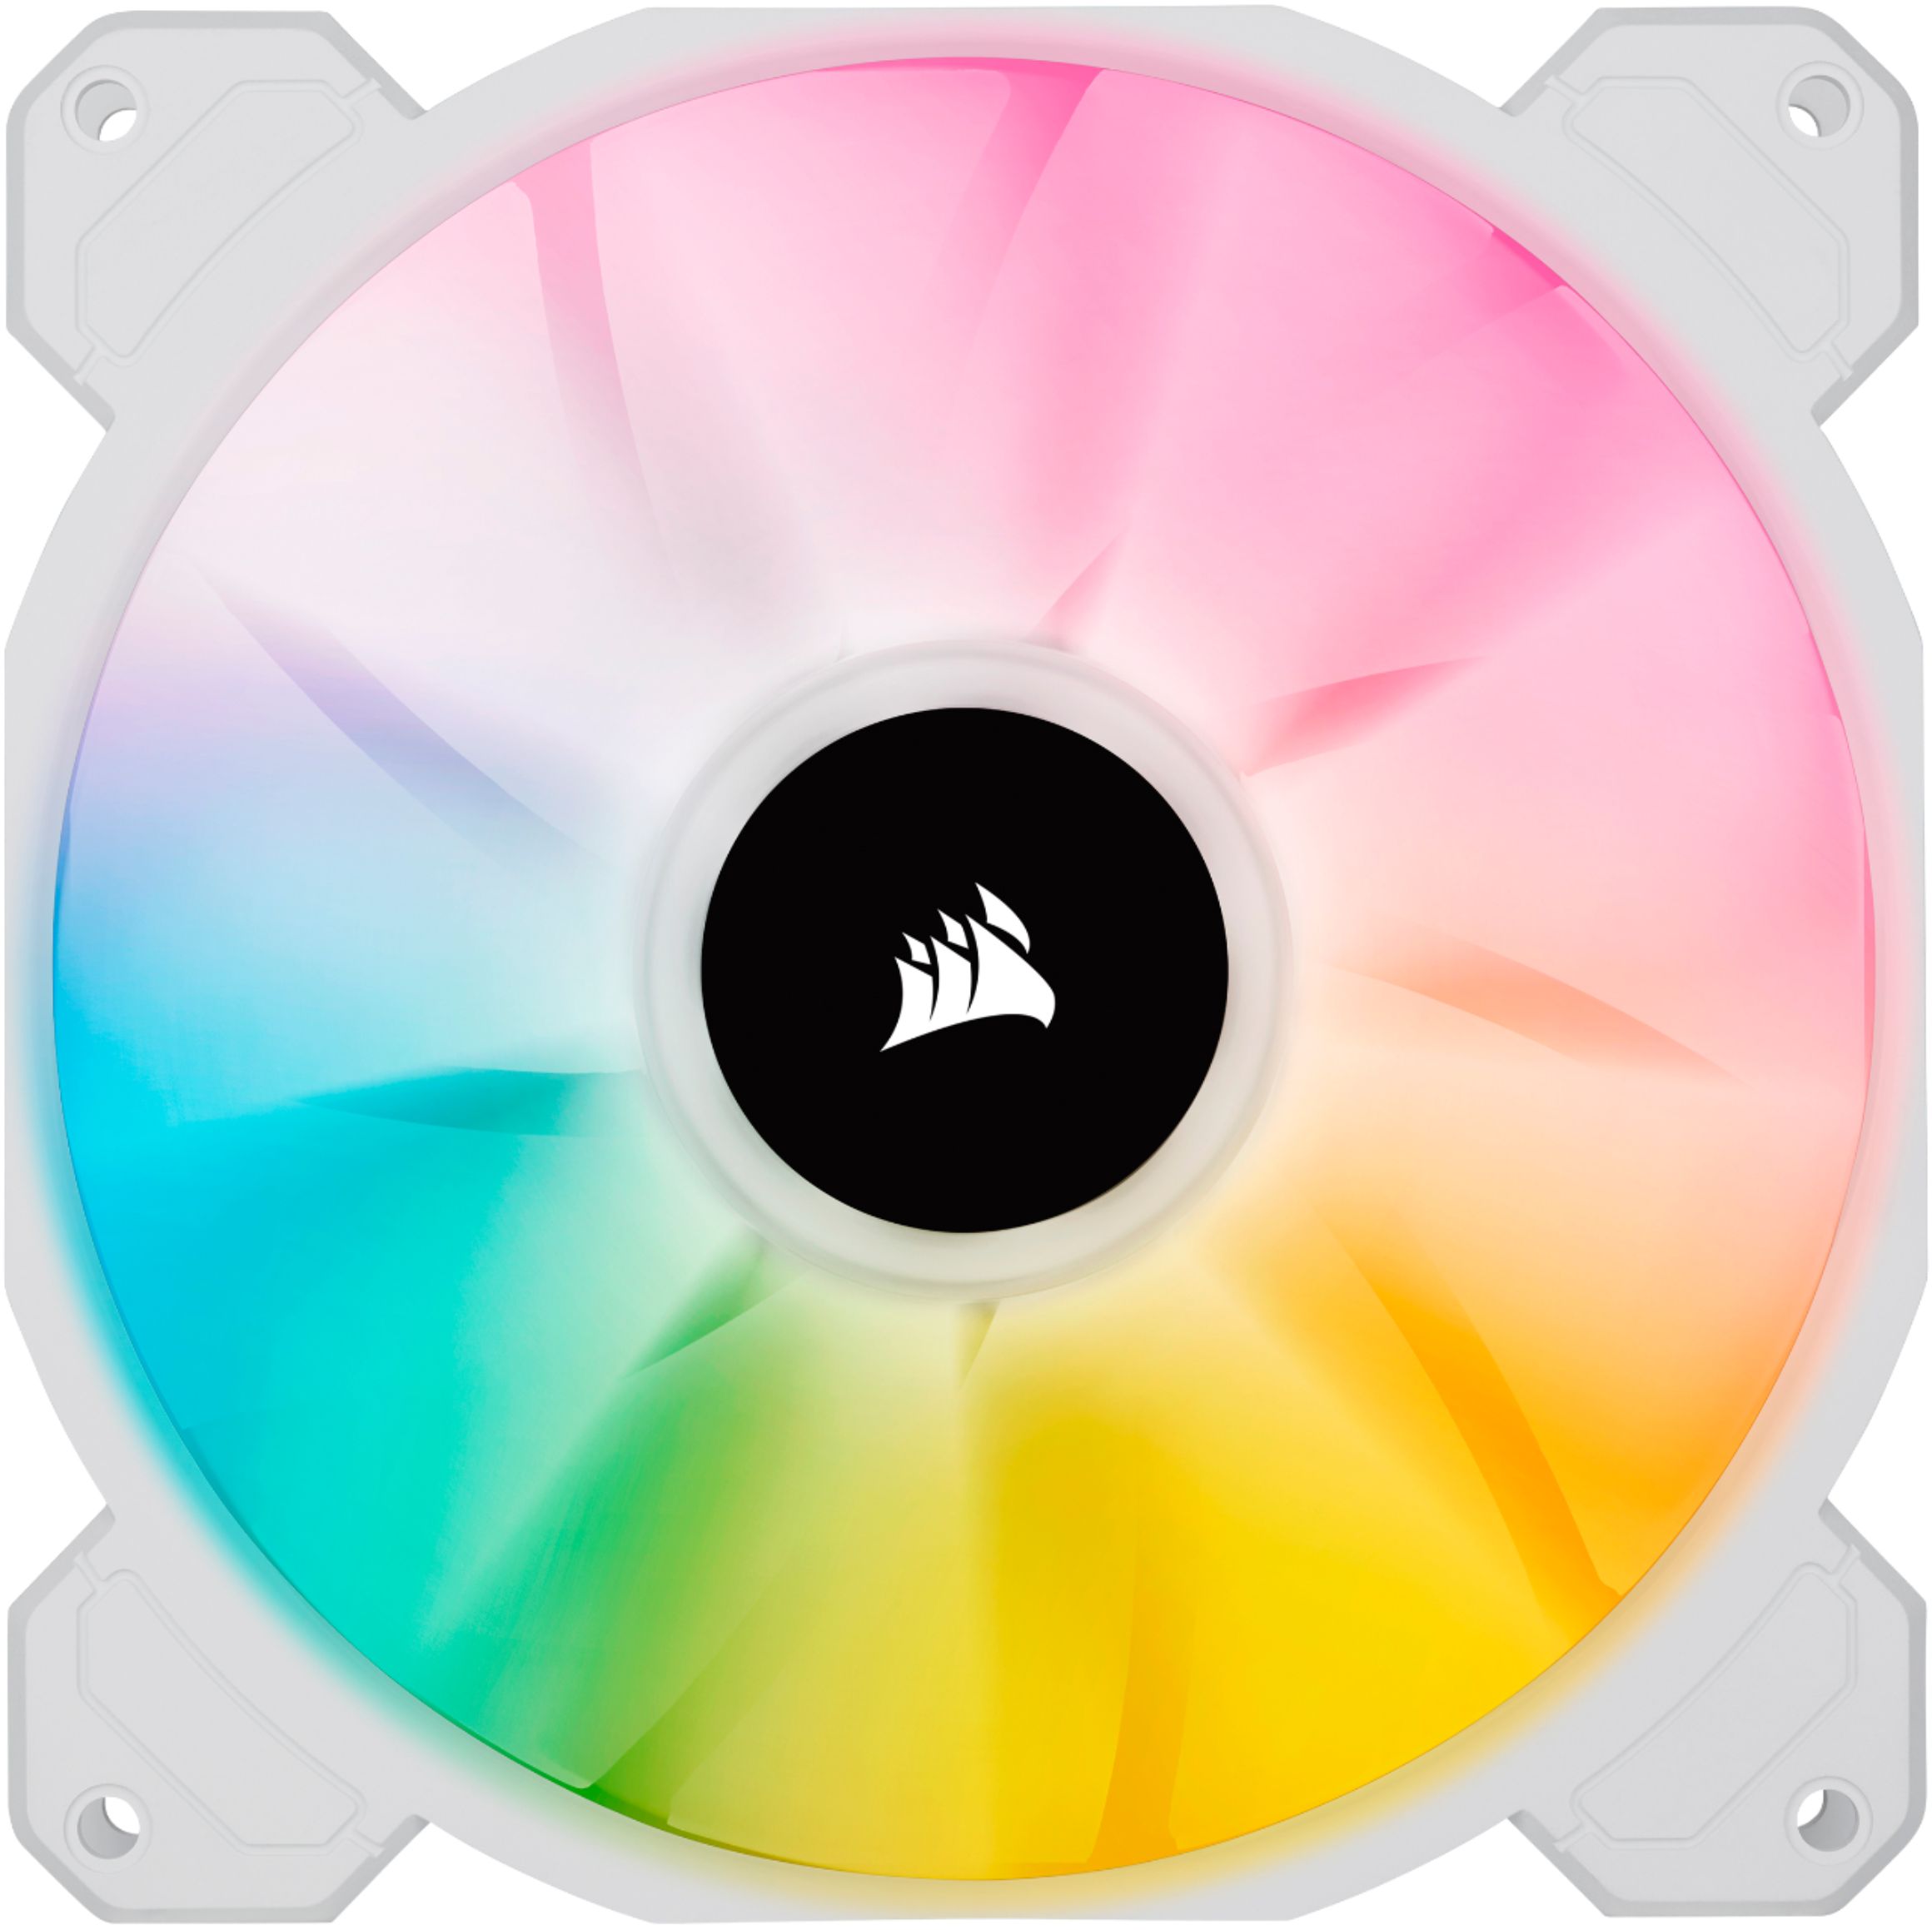 CORSAIR iCUE SP140 Dual CO-9050139-WW iCUE with Kit Node Buy ELITE White PWM CORE RGB - White Best Lighting Performance Fan 140mm